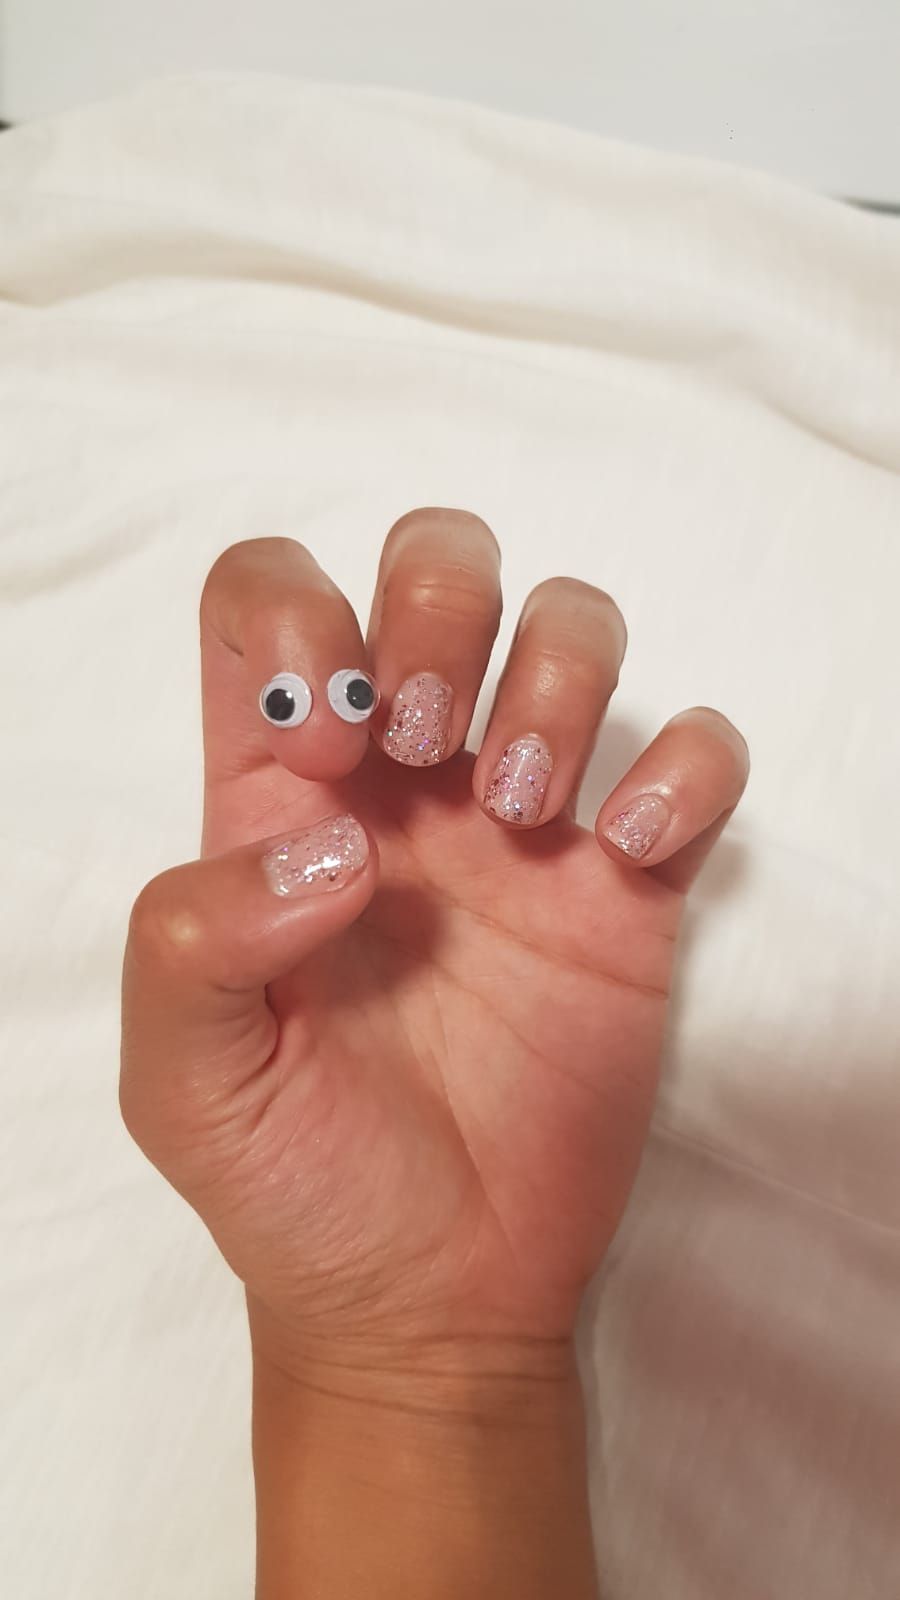 My GF was born without a nail on a finger. So due to popular demand, we put google eyes on it!